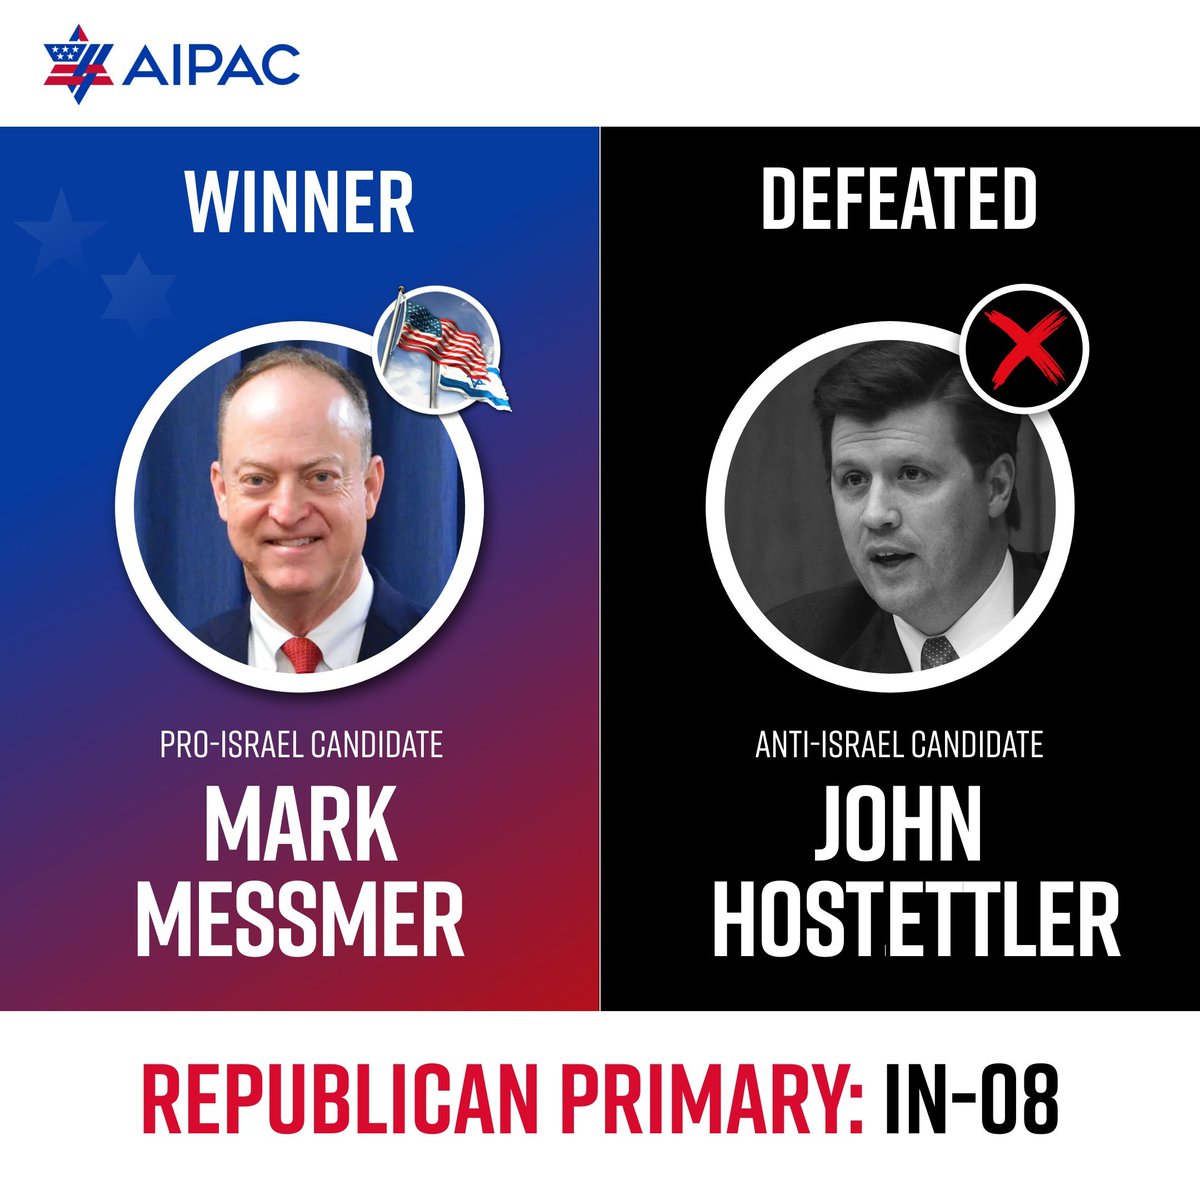 We were proud to support Mark Messmer who defeated a long-time anti-Israel detractor, John Hostettler (R). Regardless of party affiliation, we will support pro-Israel candidates and oppose detractors. Being pro-Israel is good policy and good politics — for both parties.…